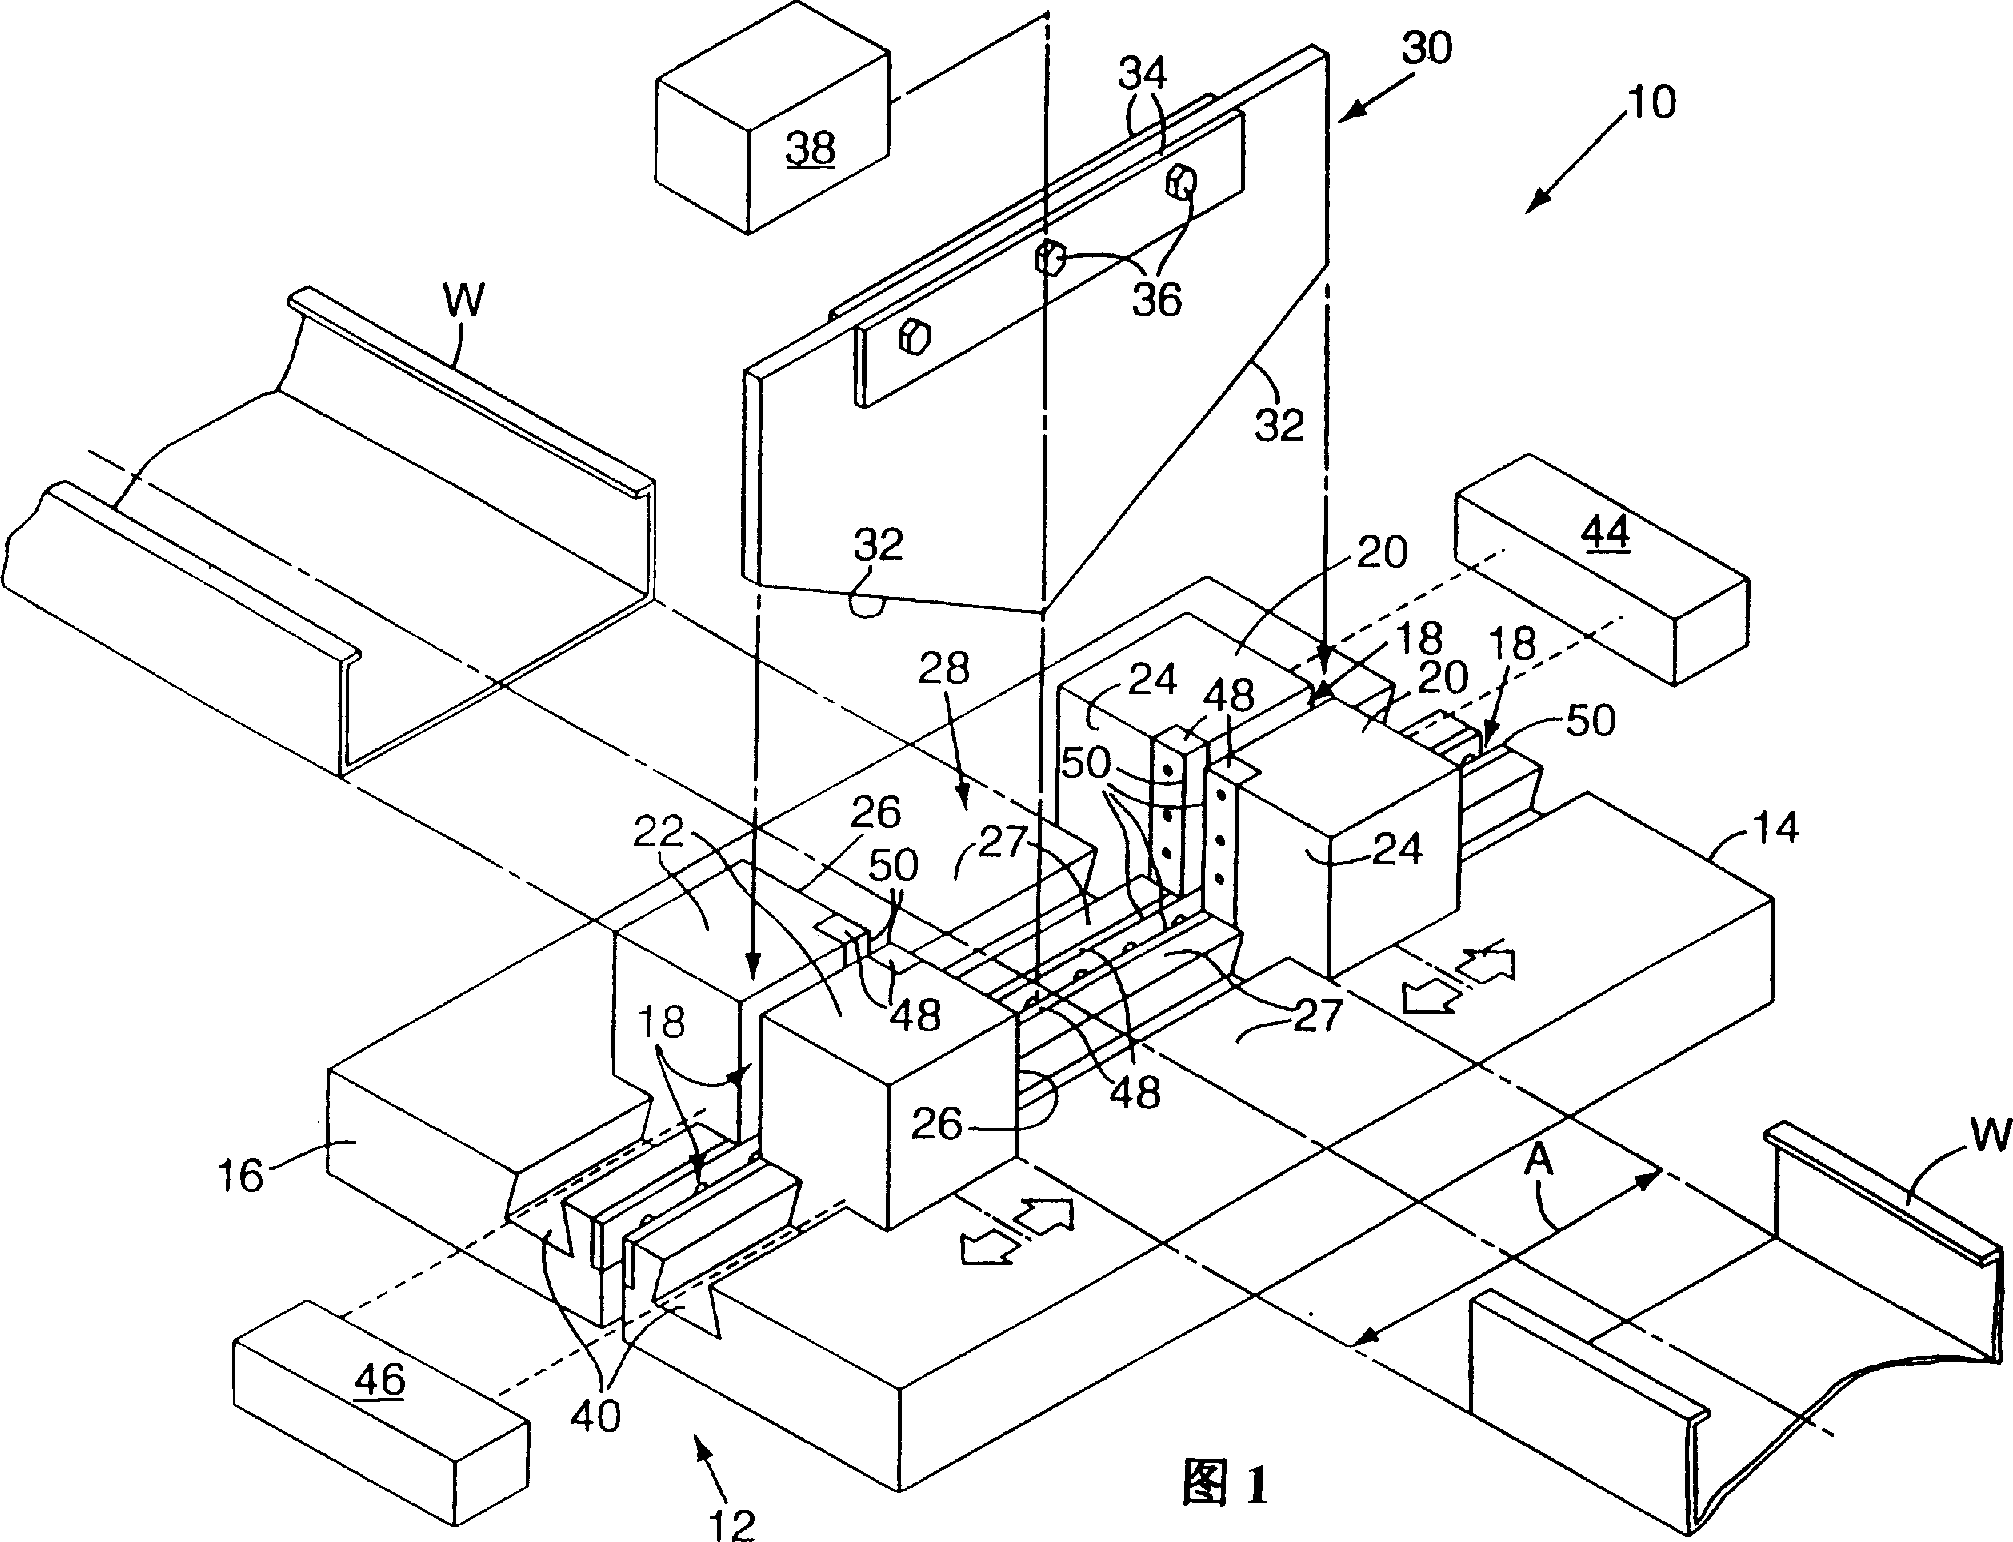 Apparatus for shearing multi-walled workpieces